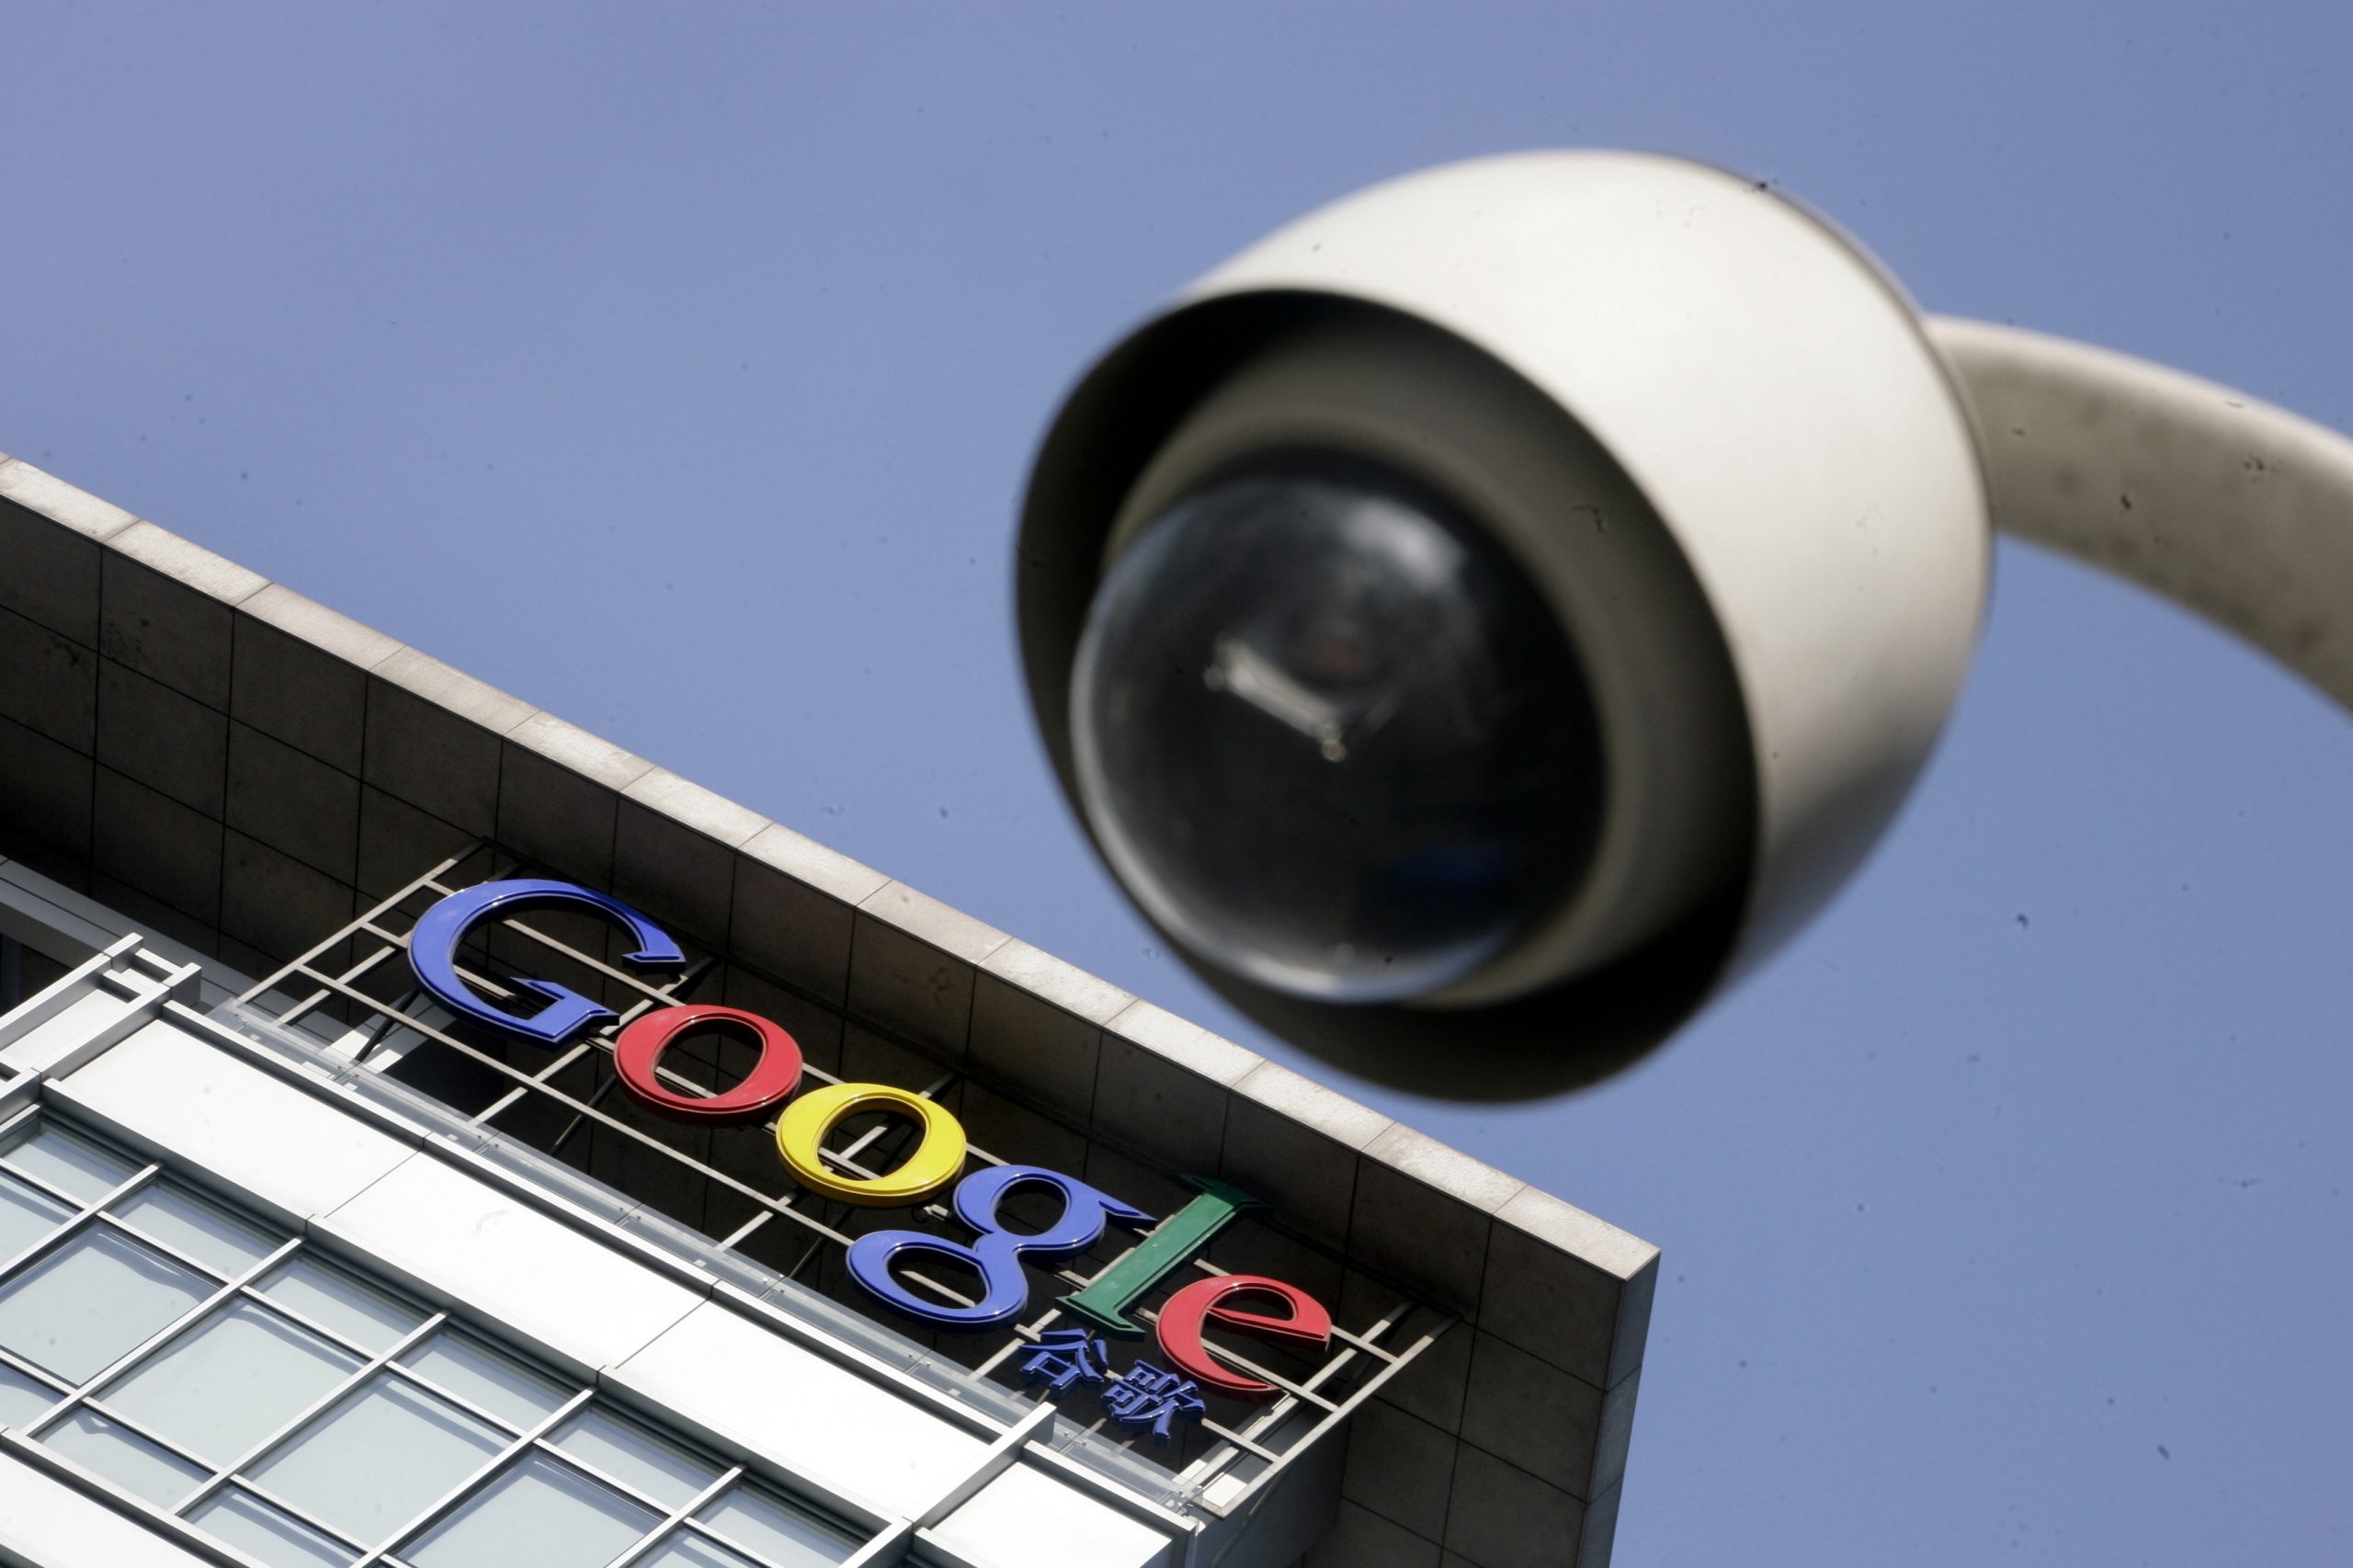 Google stops responding to data requests from Hong Kong authorities | DeviceDaily.com